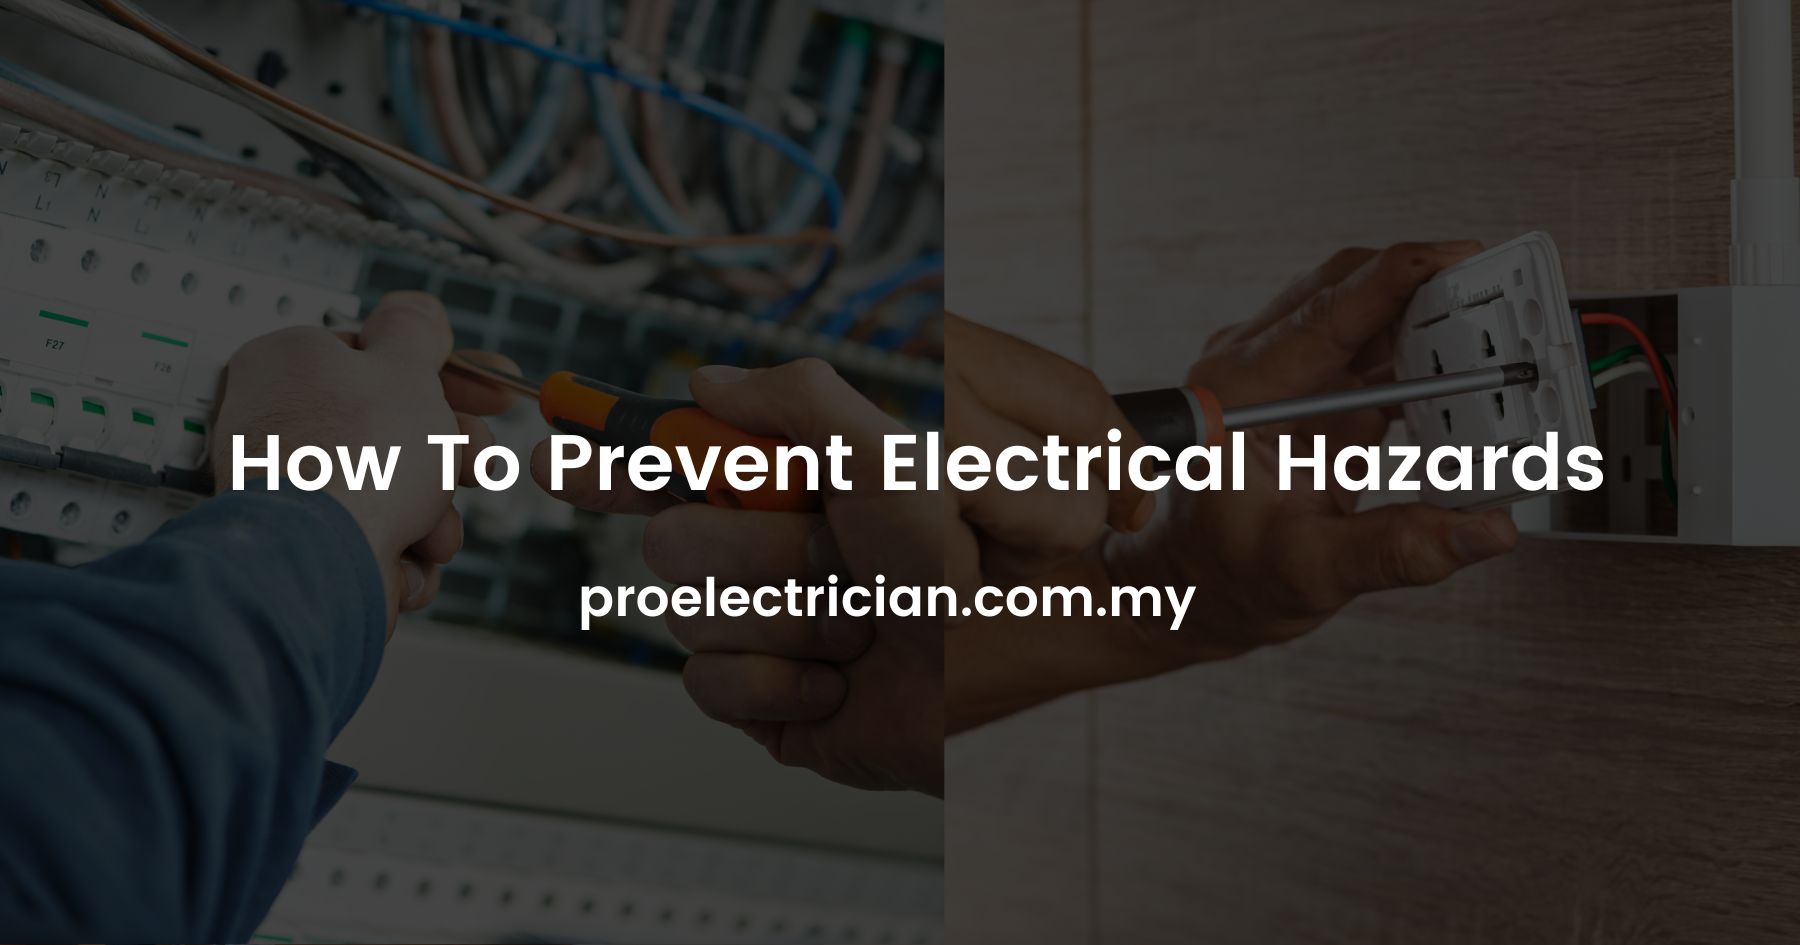 How To Prevent Electrical Hazards